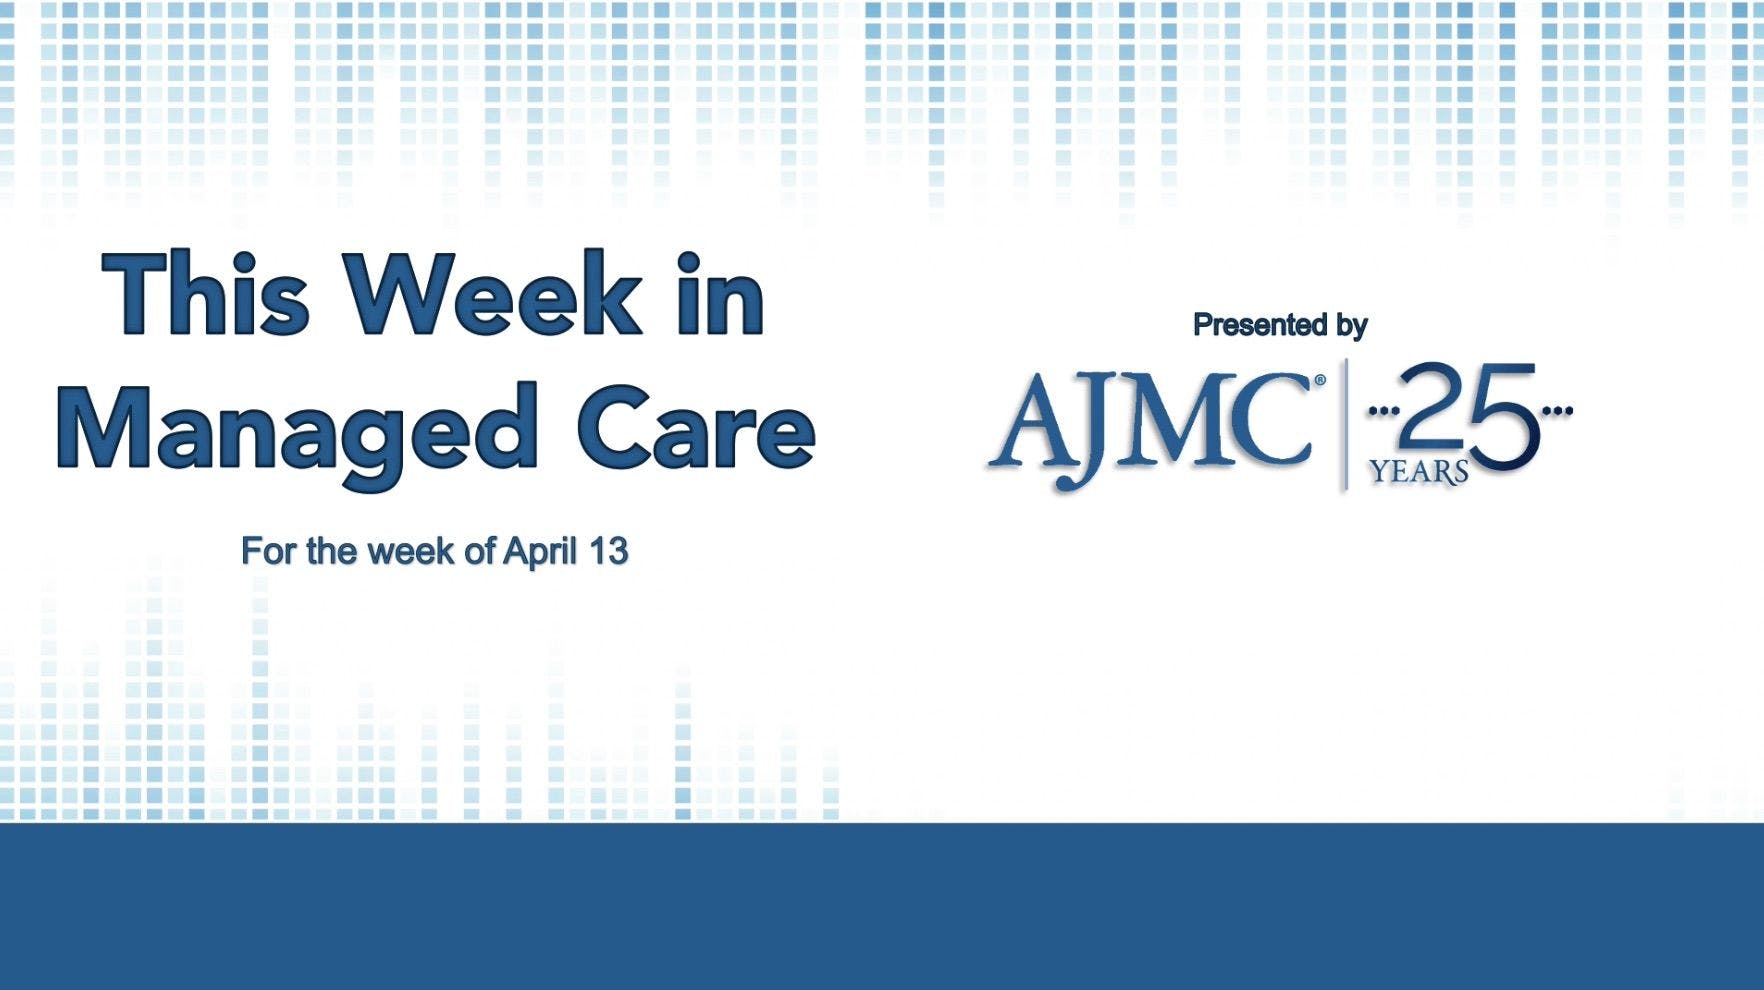 This Week in Managed Care: April 17, 2020